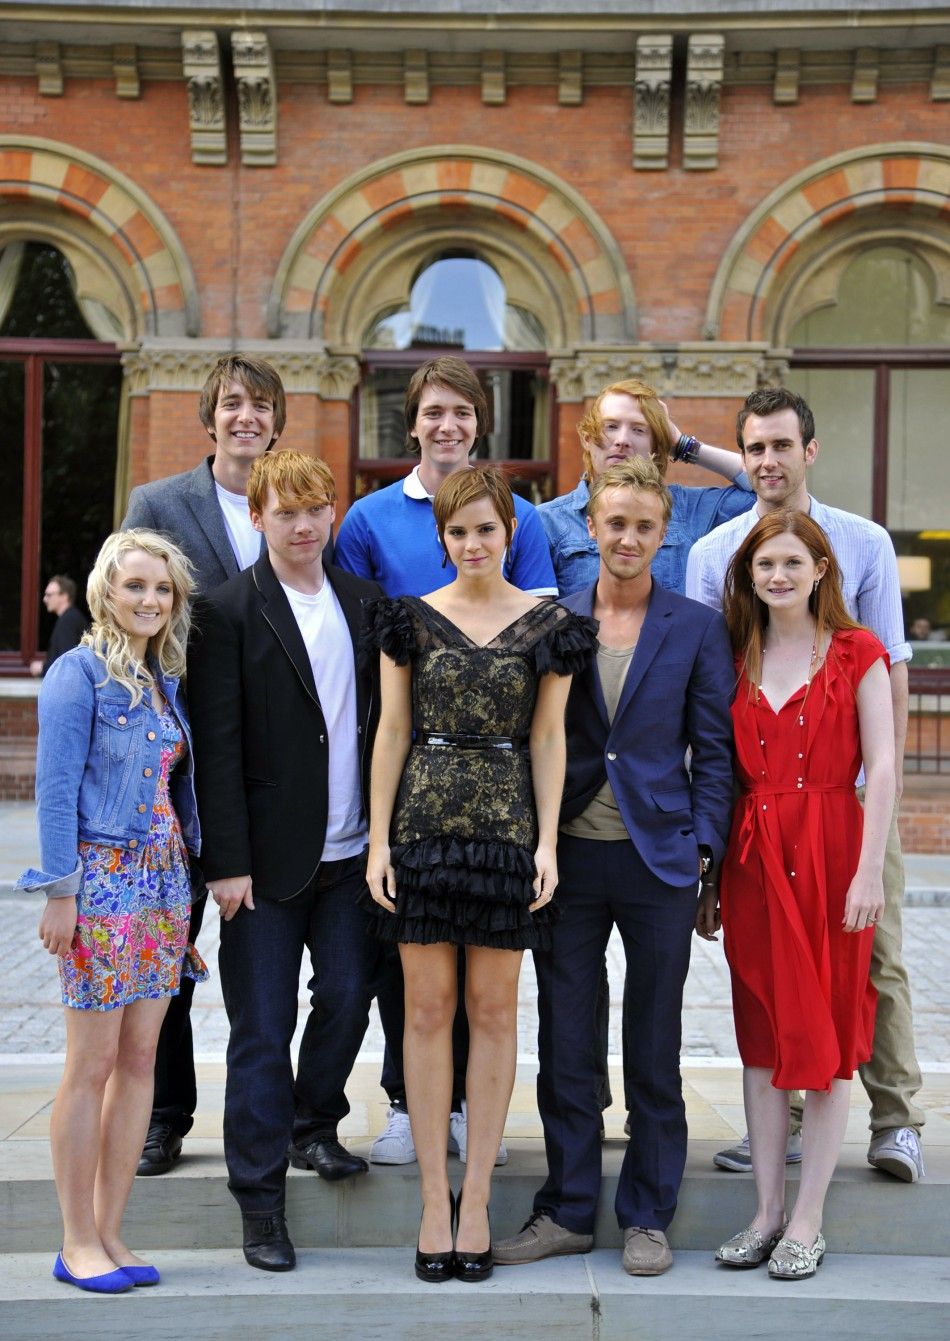 Harry Potter actors attend a photocall outside of St Pancras Station and hotel in central London